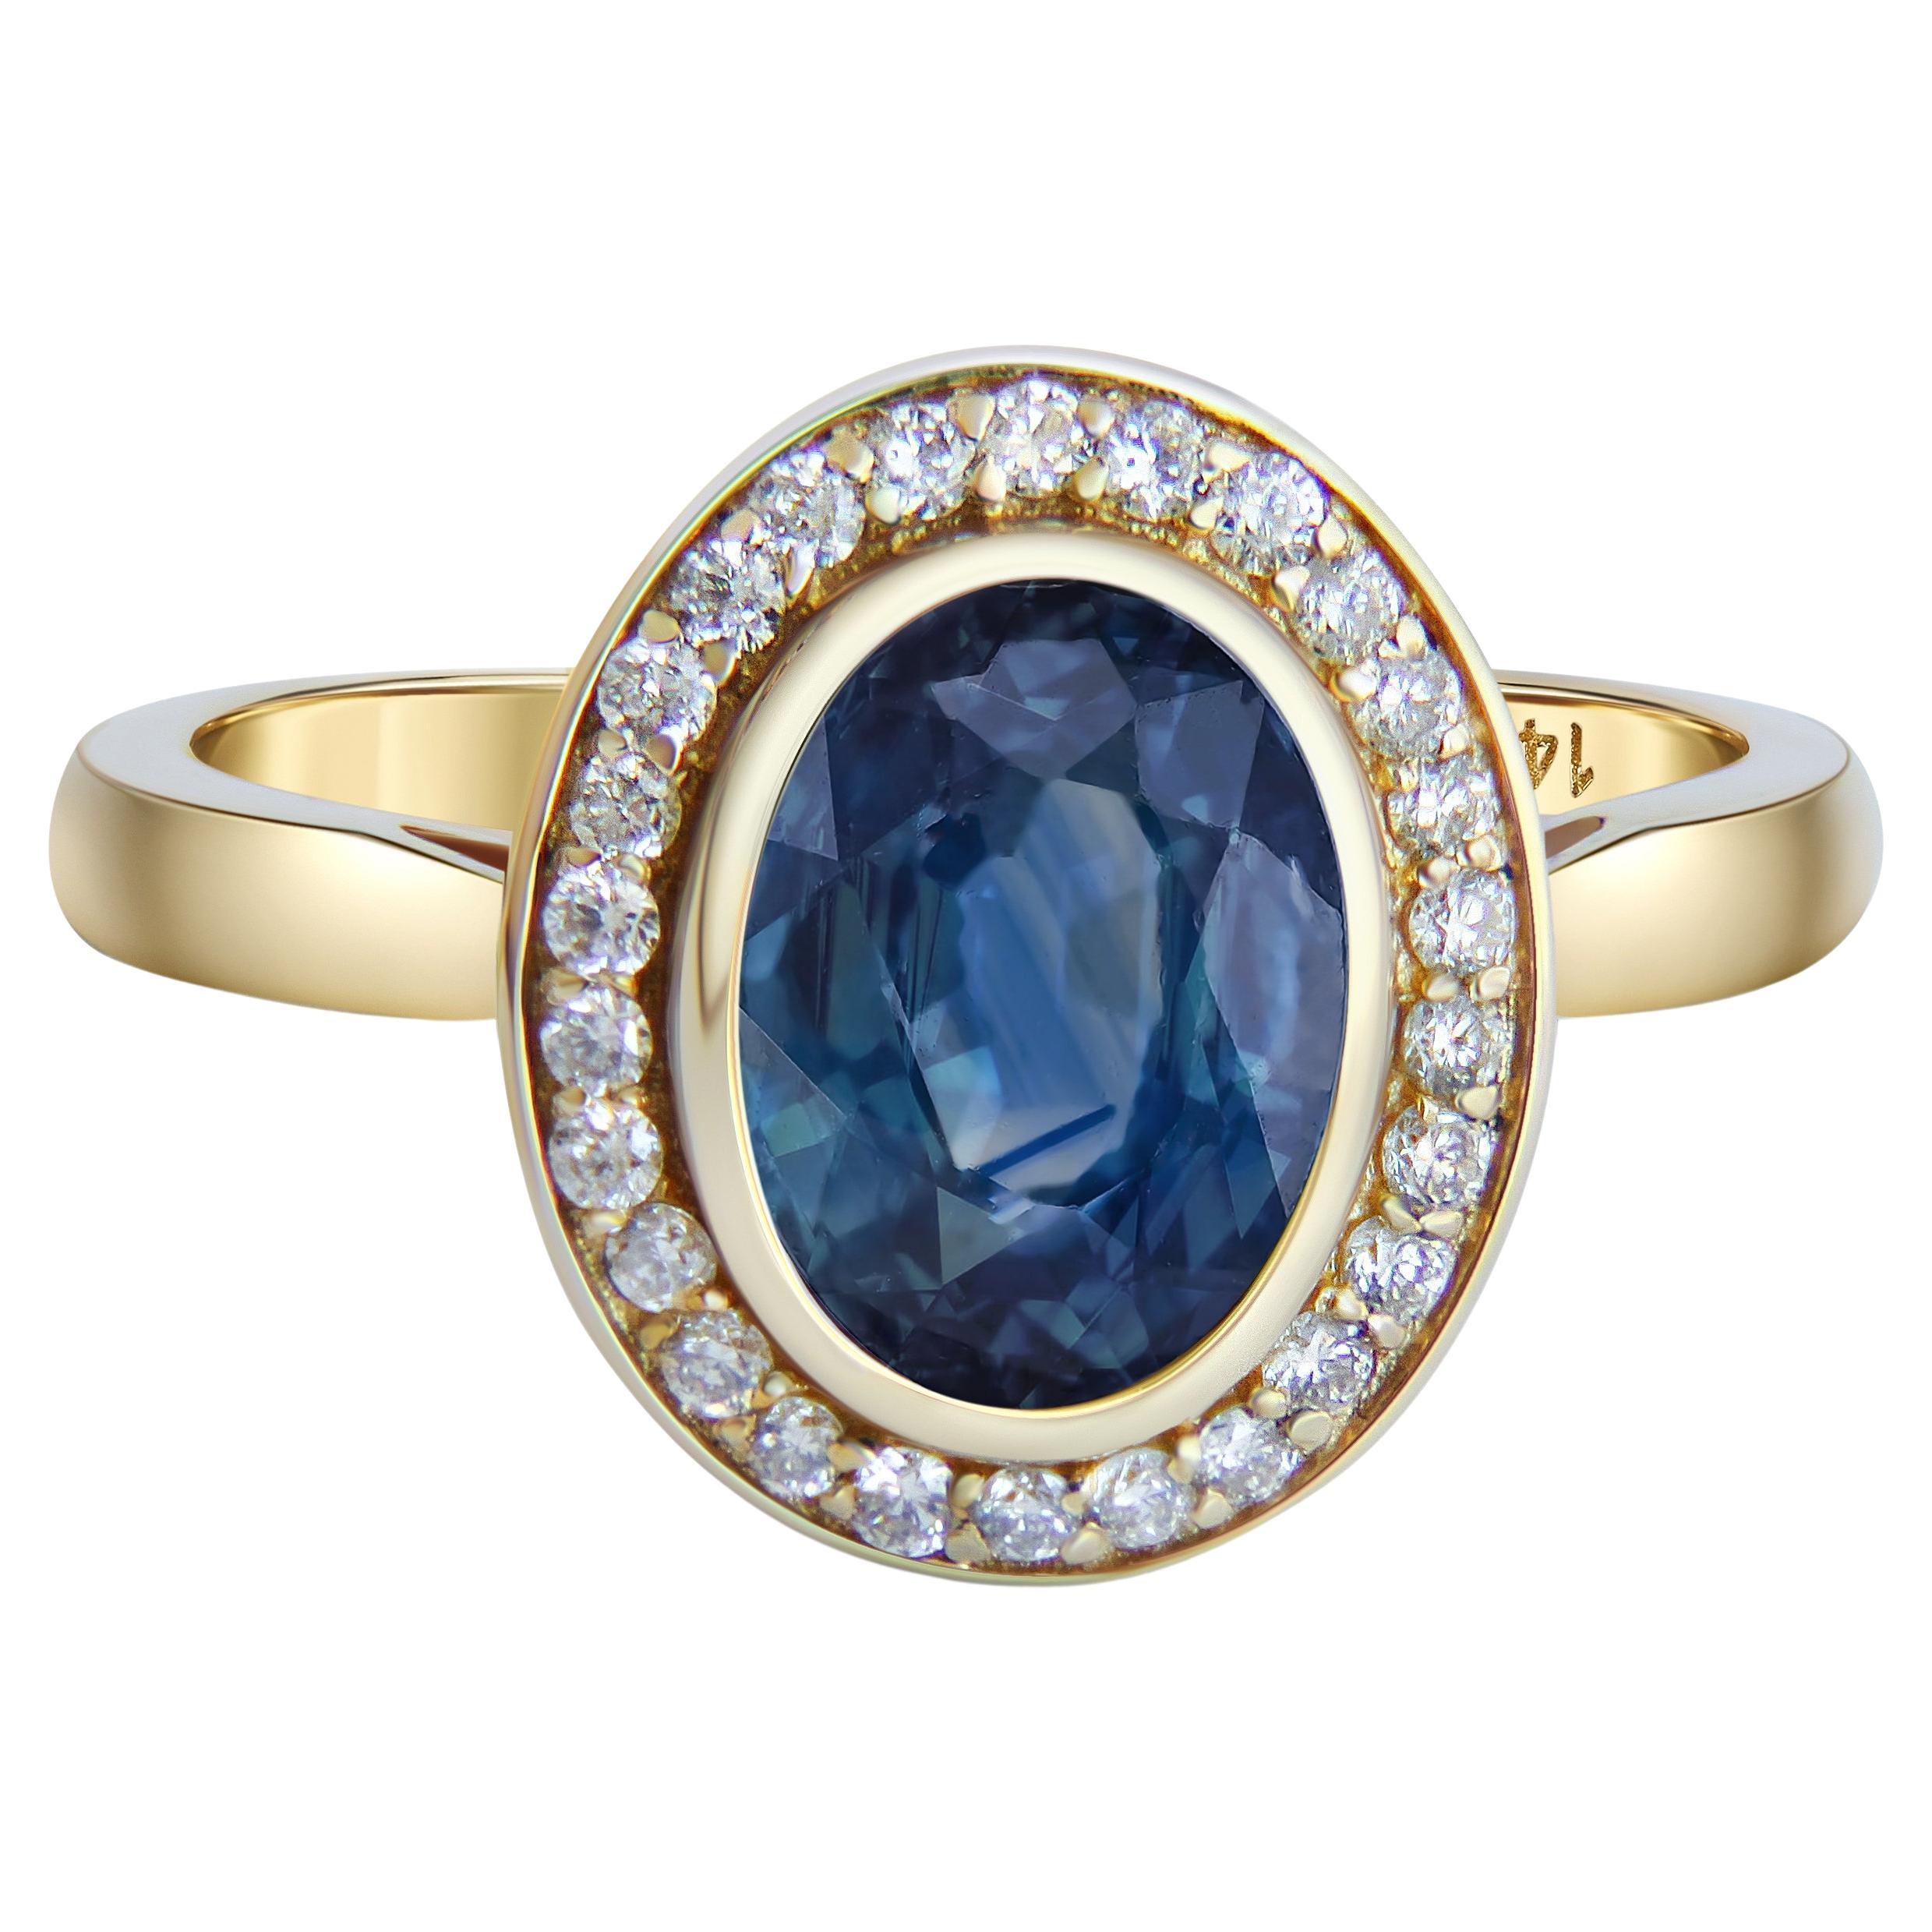 For Sale:  Sapphire and diamonds 14k gold ring.